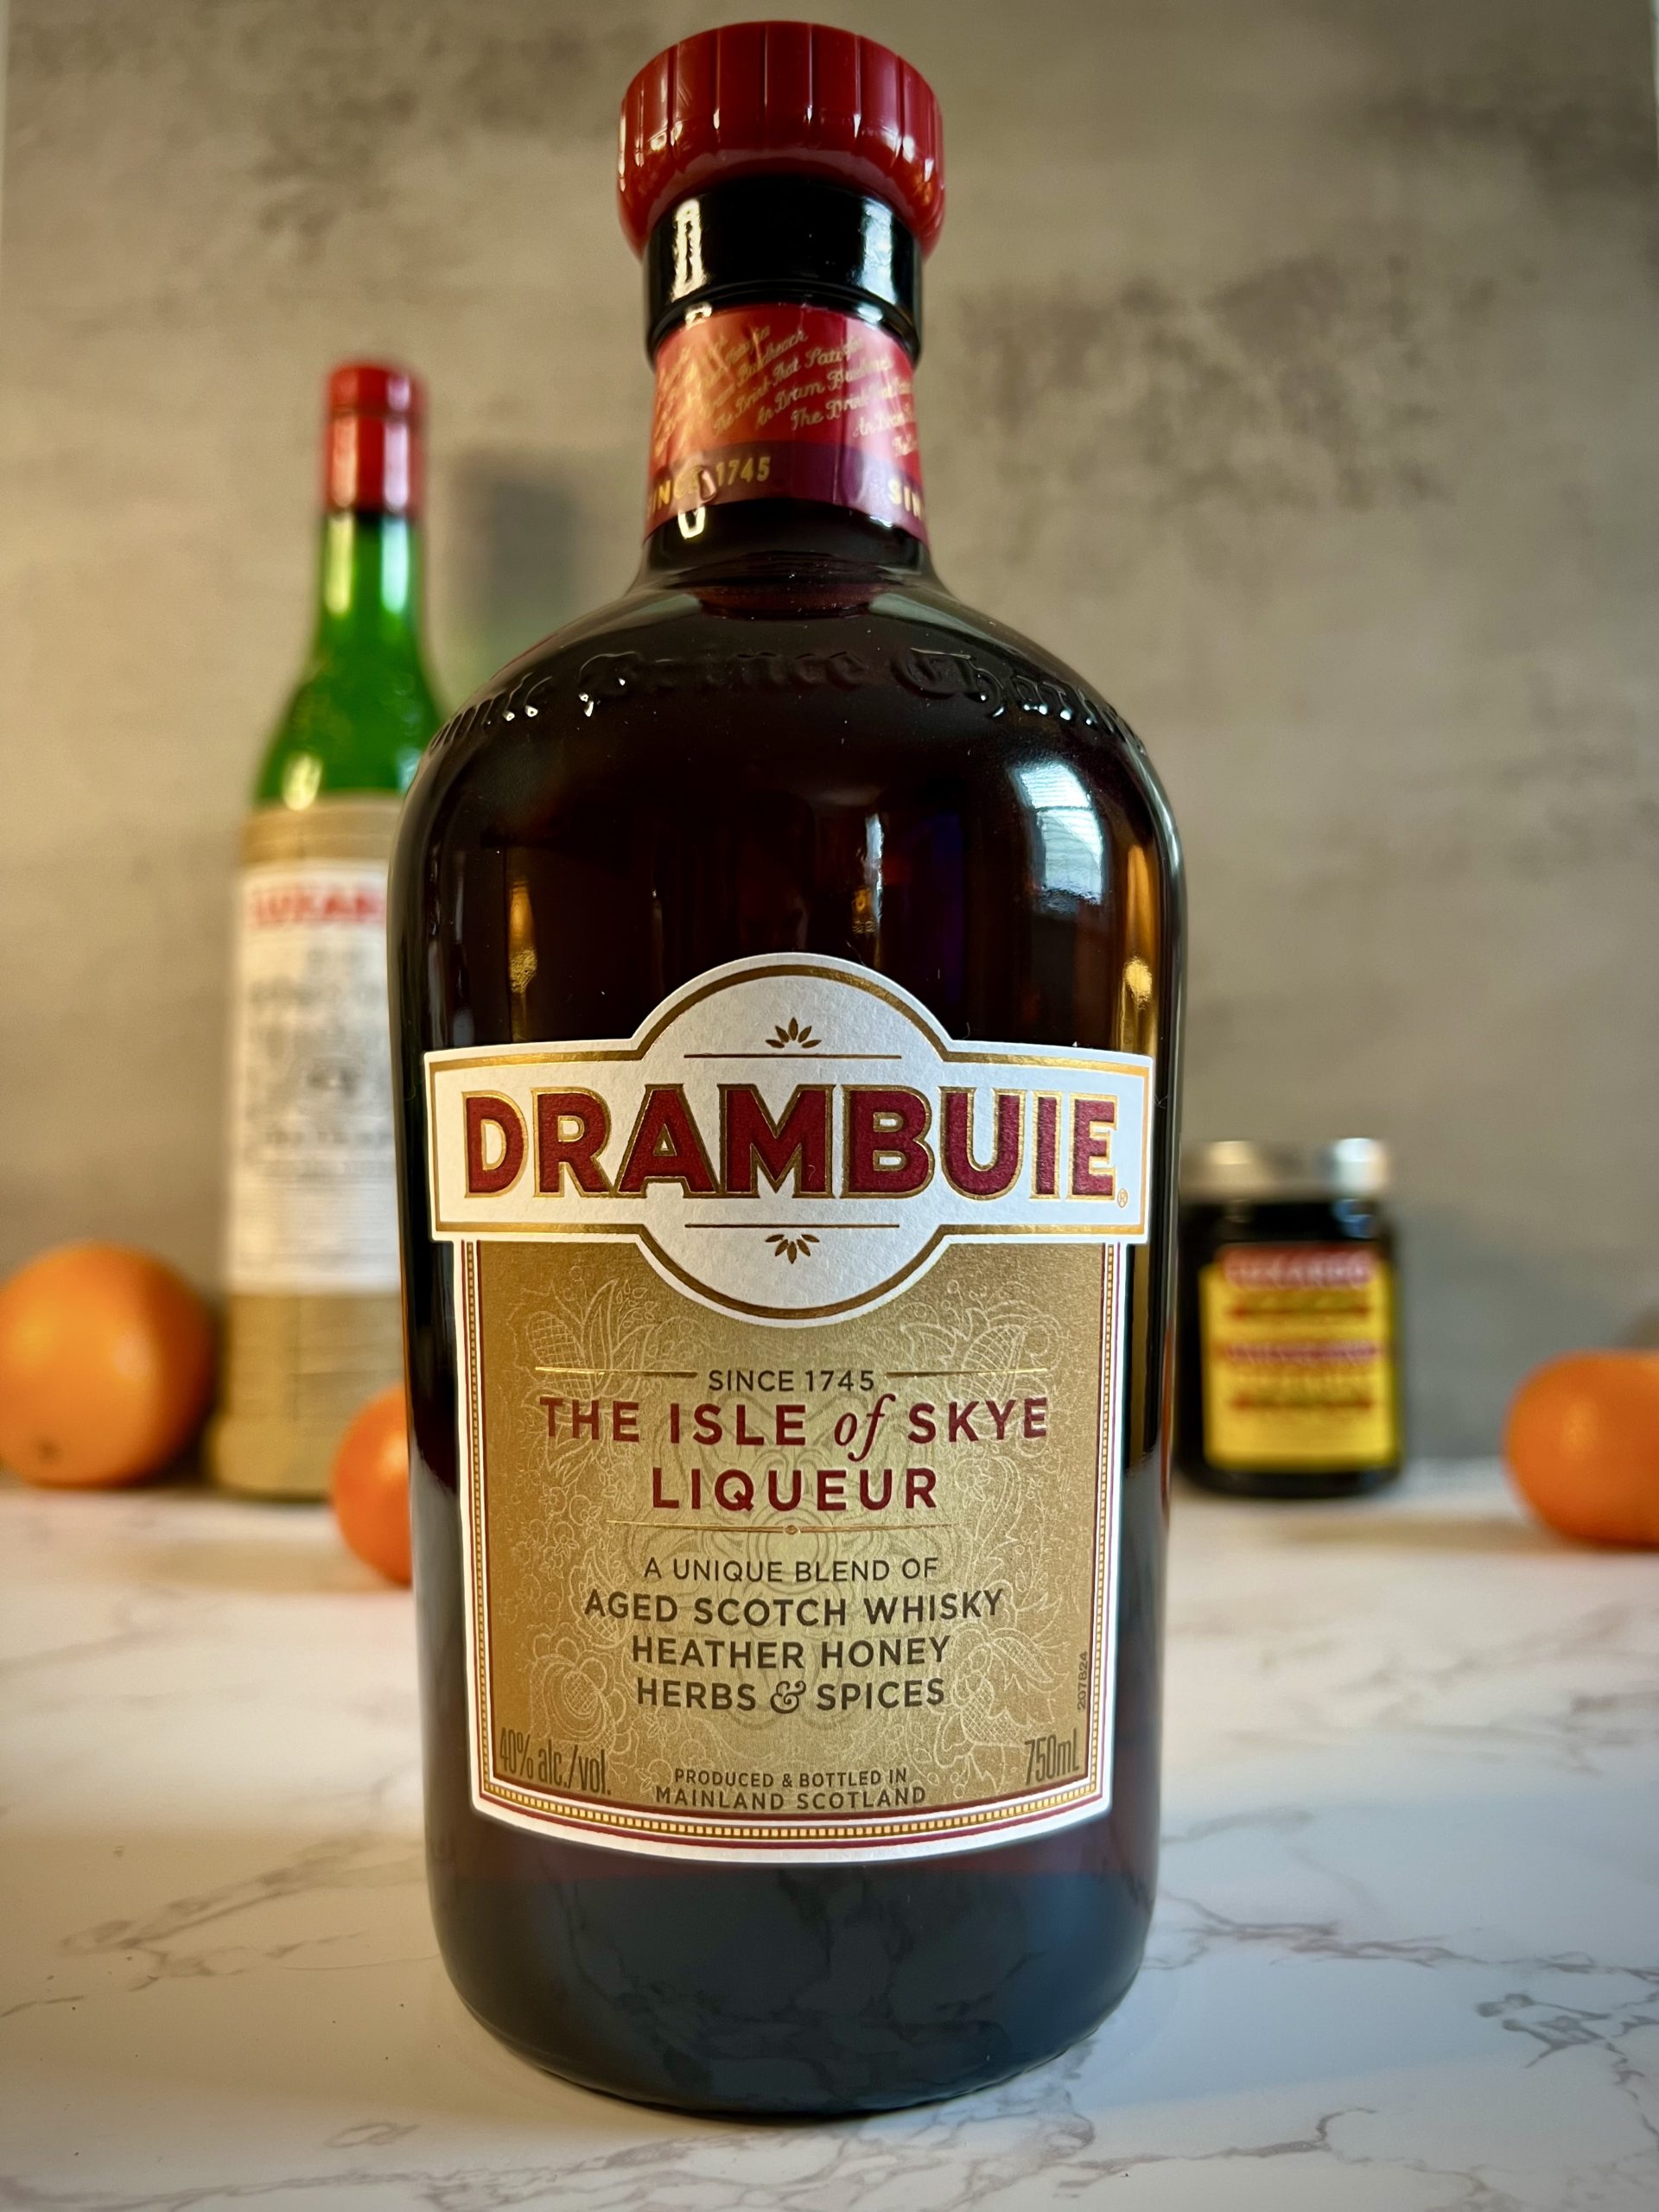 A bottle of Drambuie sits on a countertop.